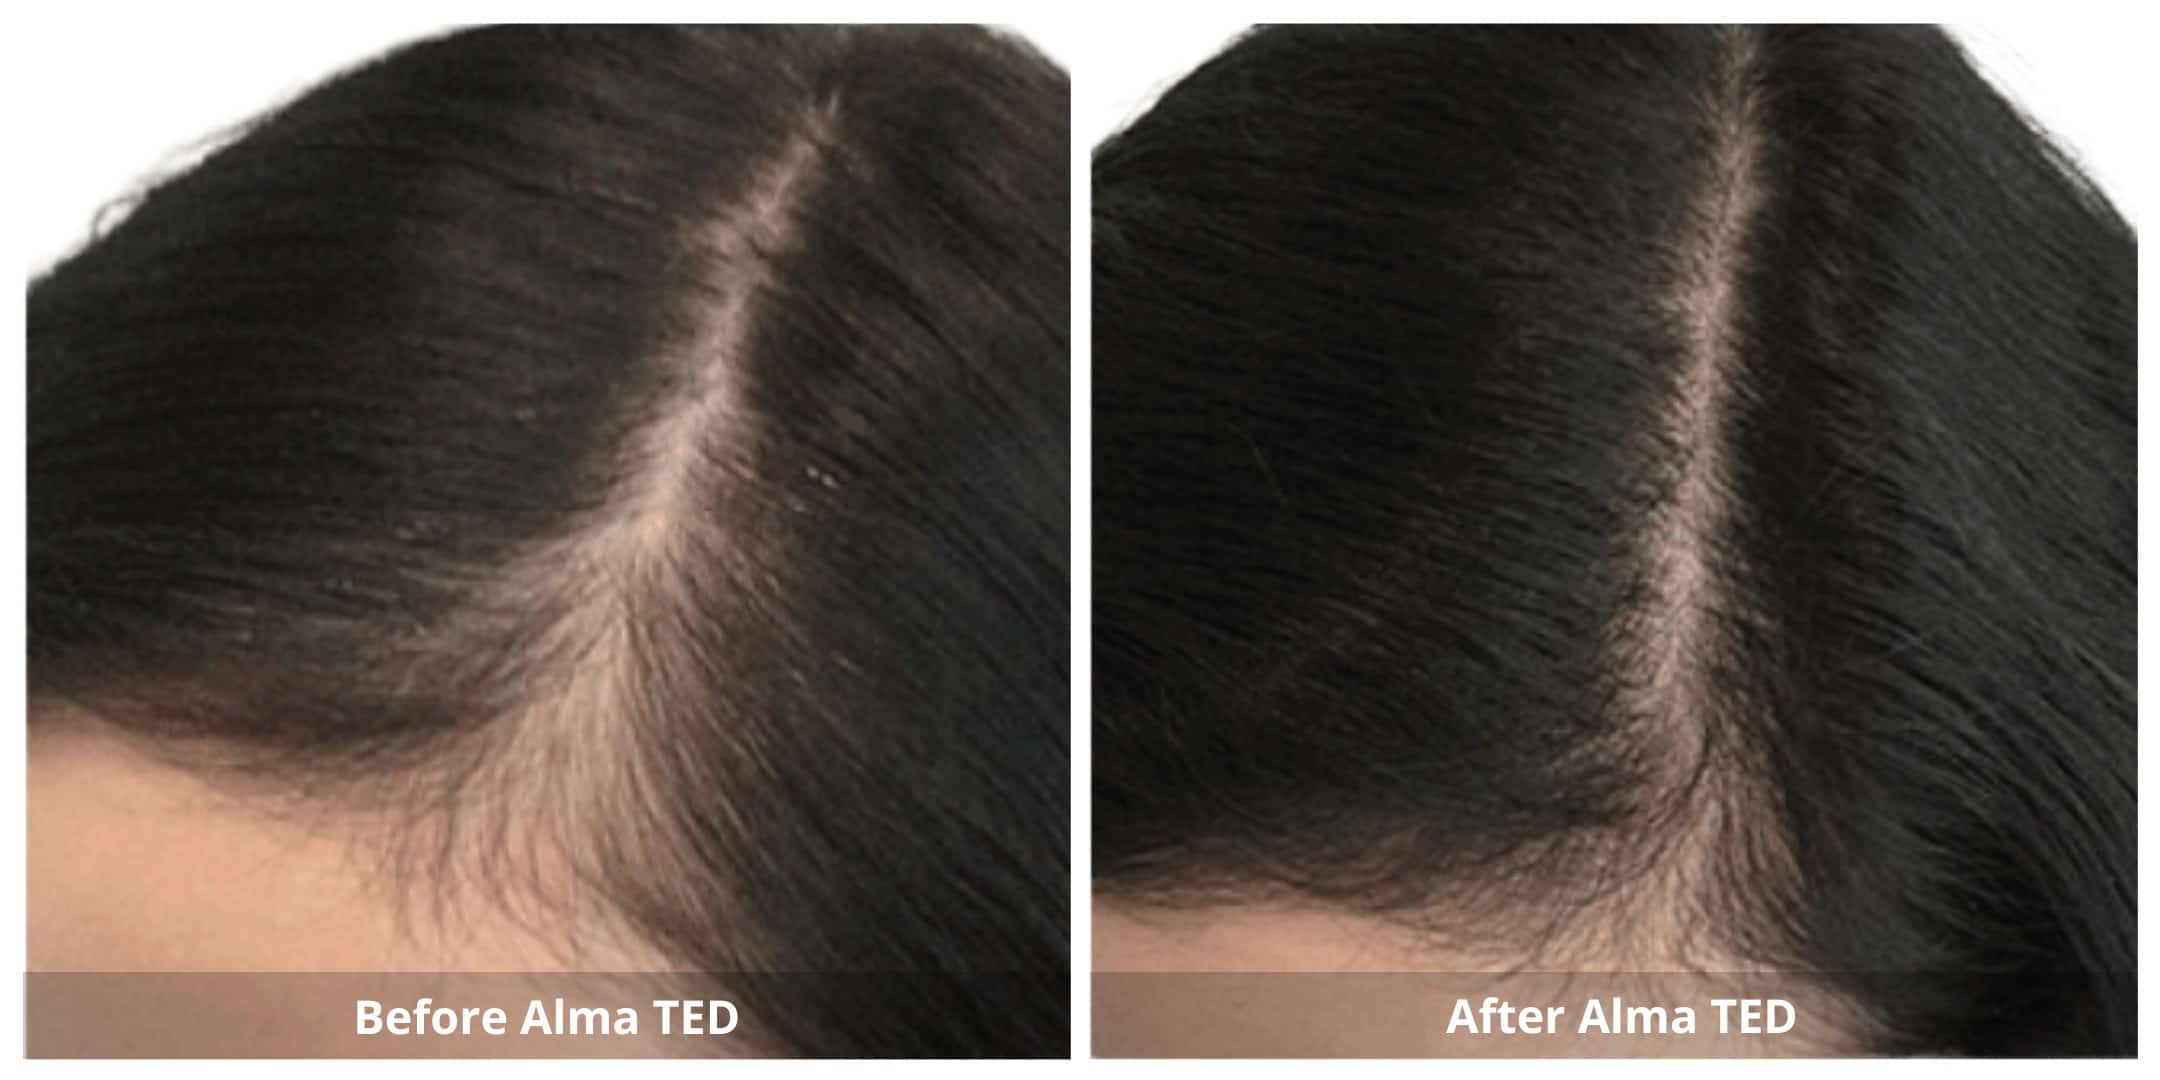 Alma ted hair restoration before and after photo 4